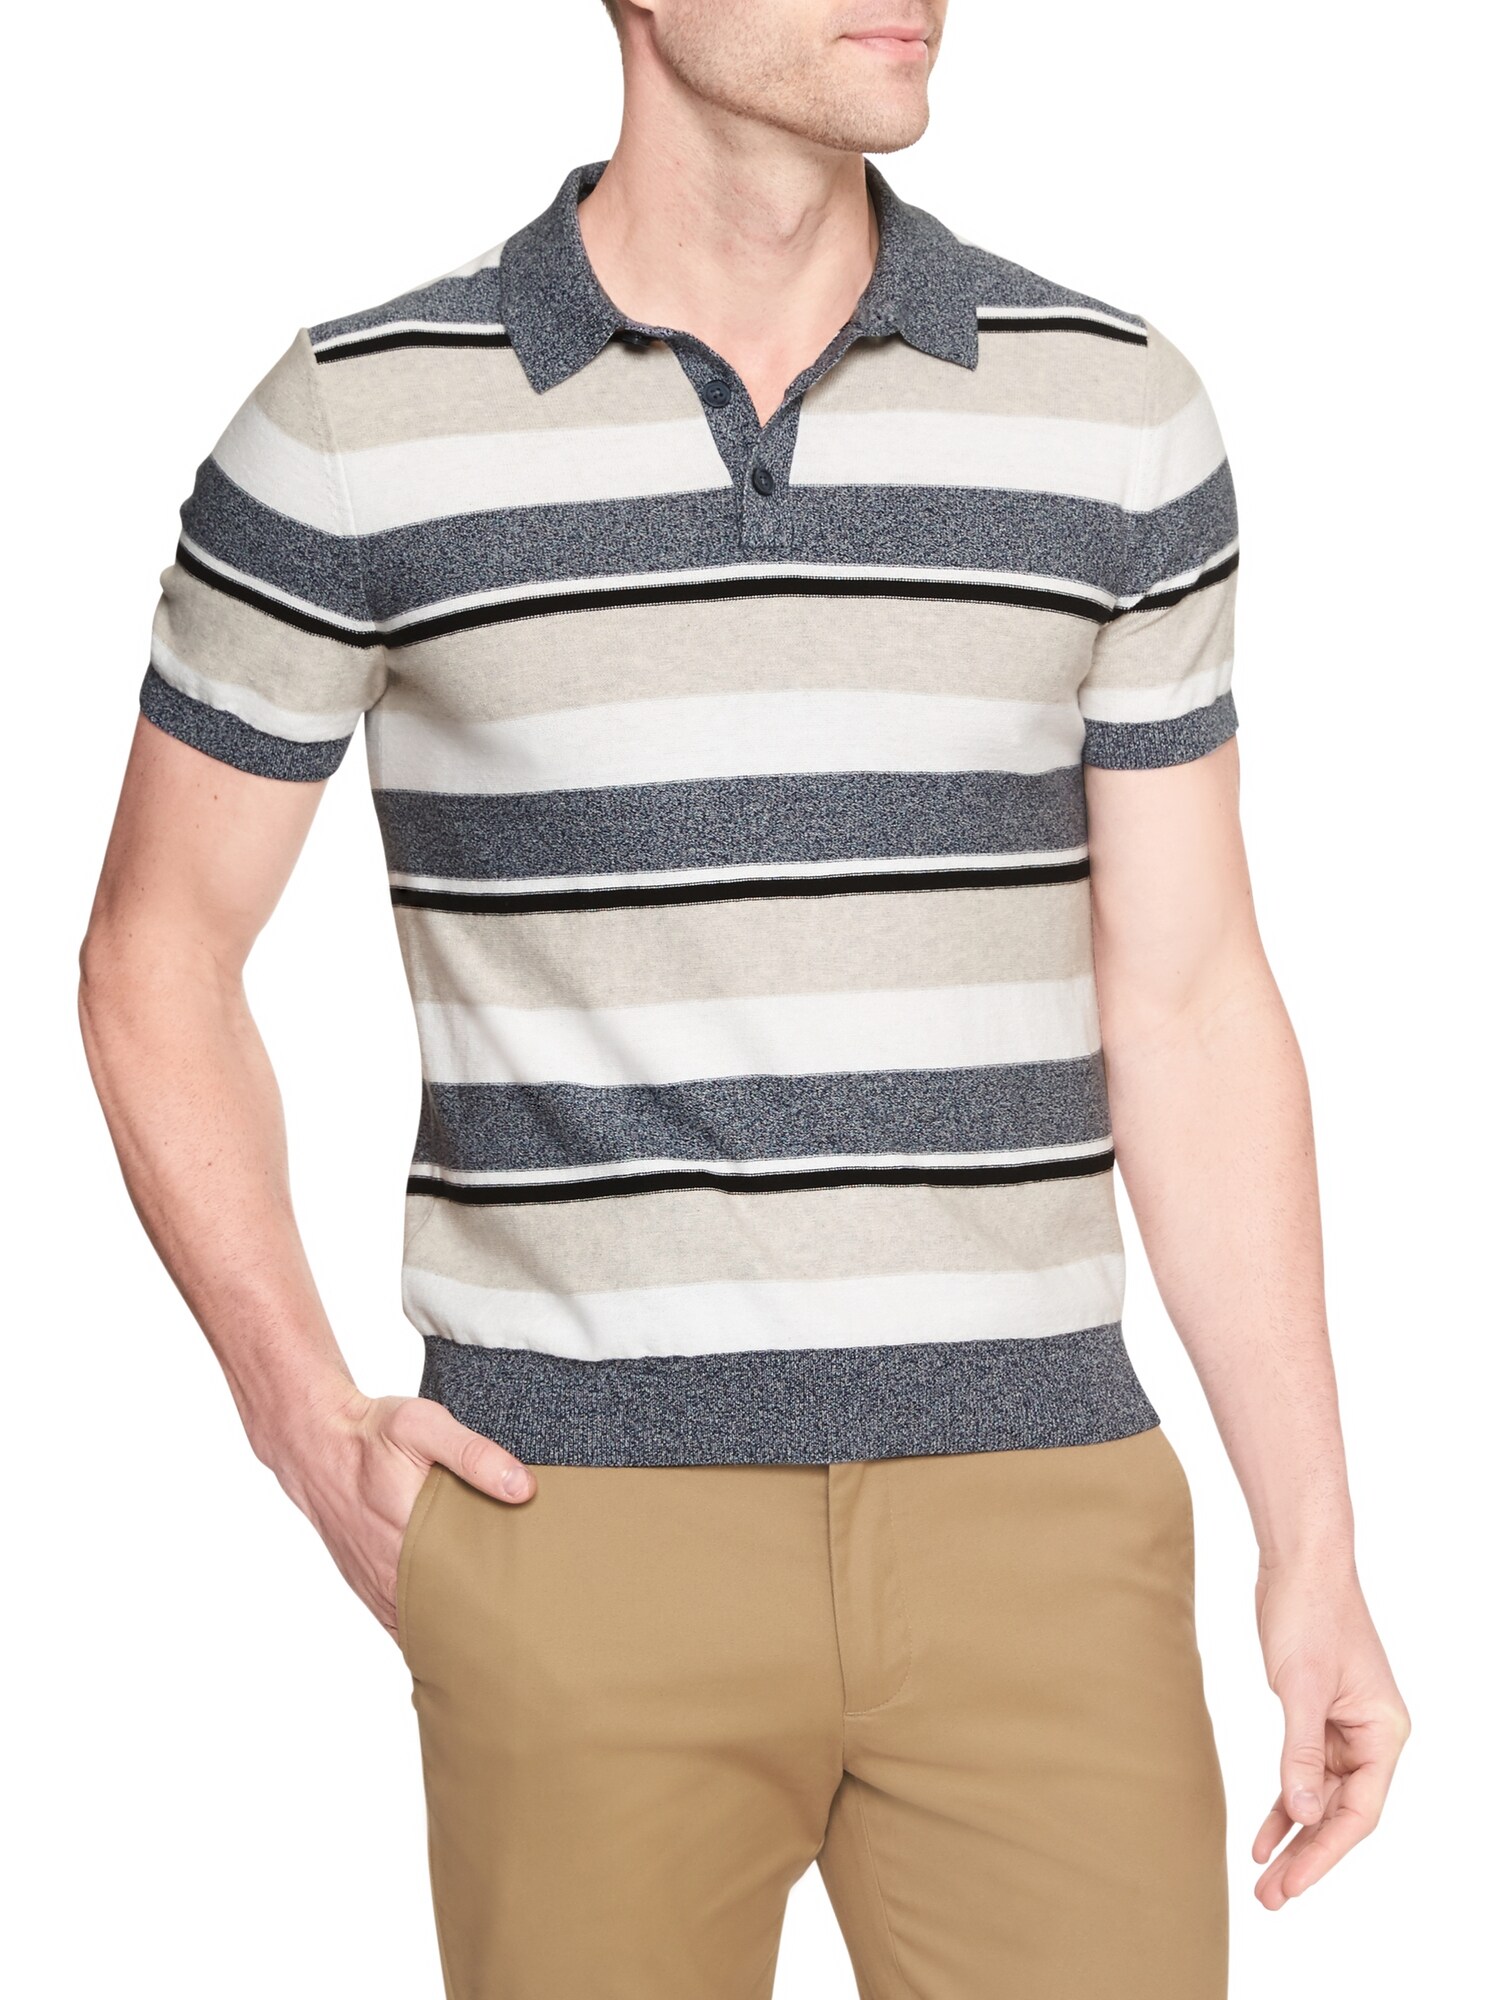 Variegated Stripe Sweater Polo